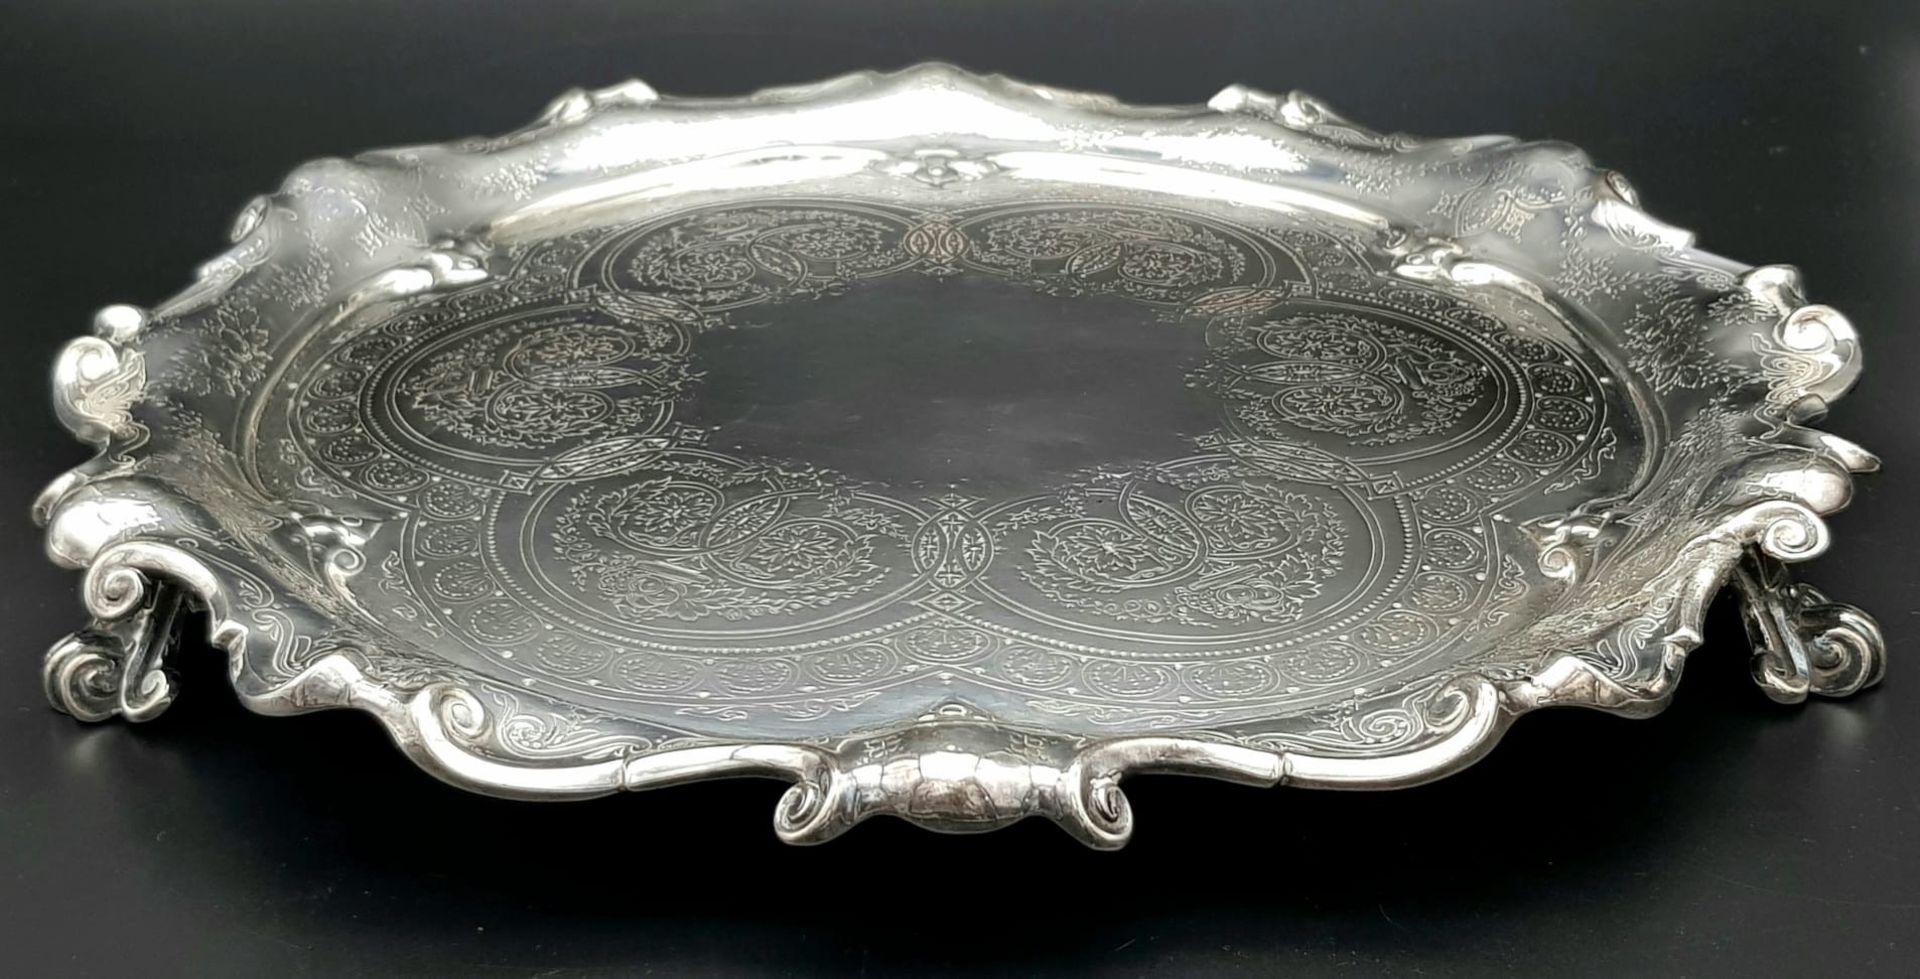 A 761gms solid silver Salva with scrolled edges and hand chased intricate decoration and